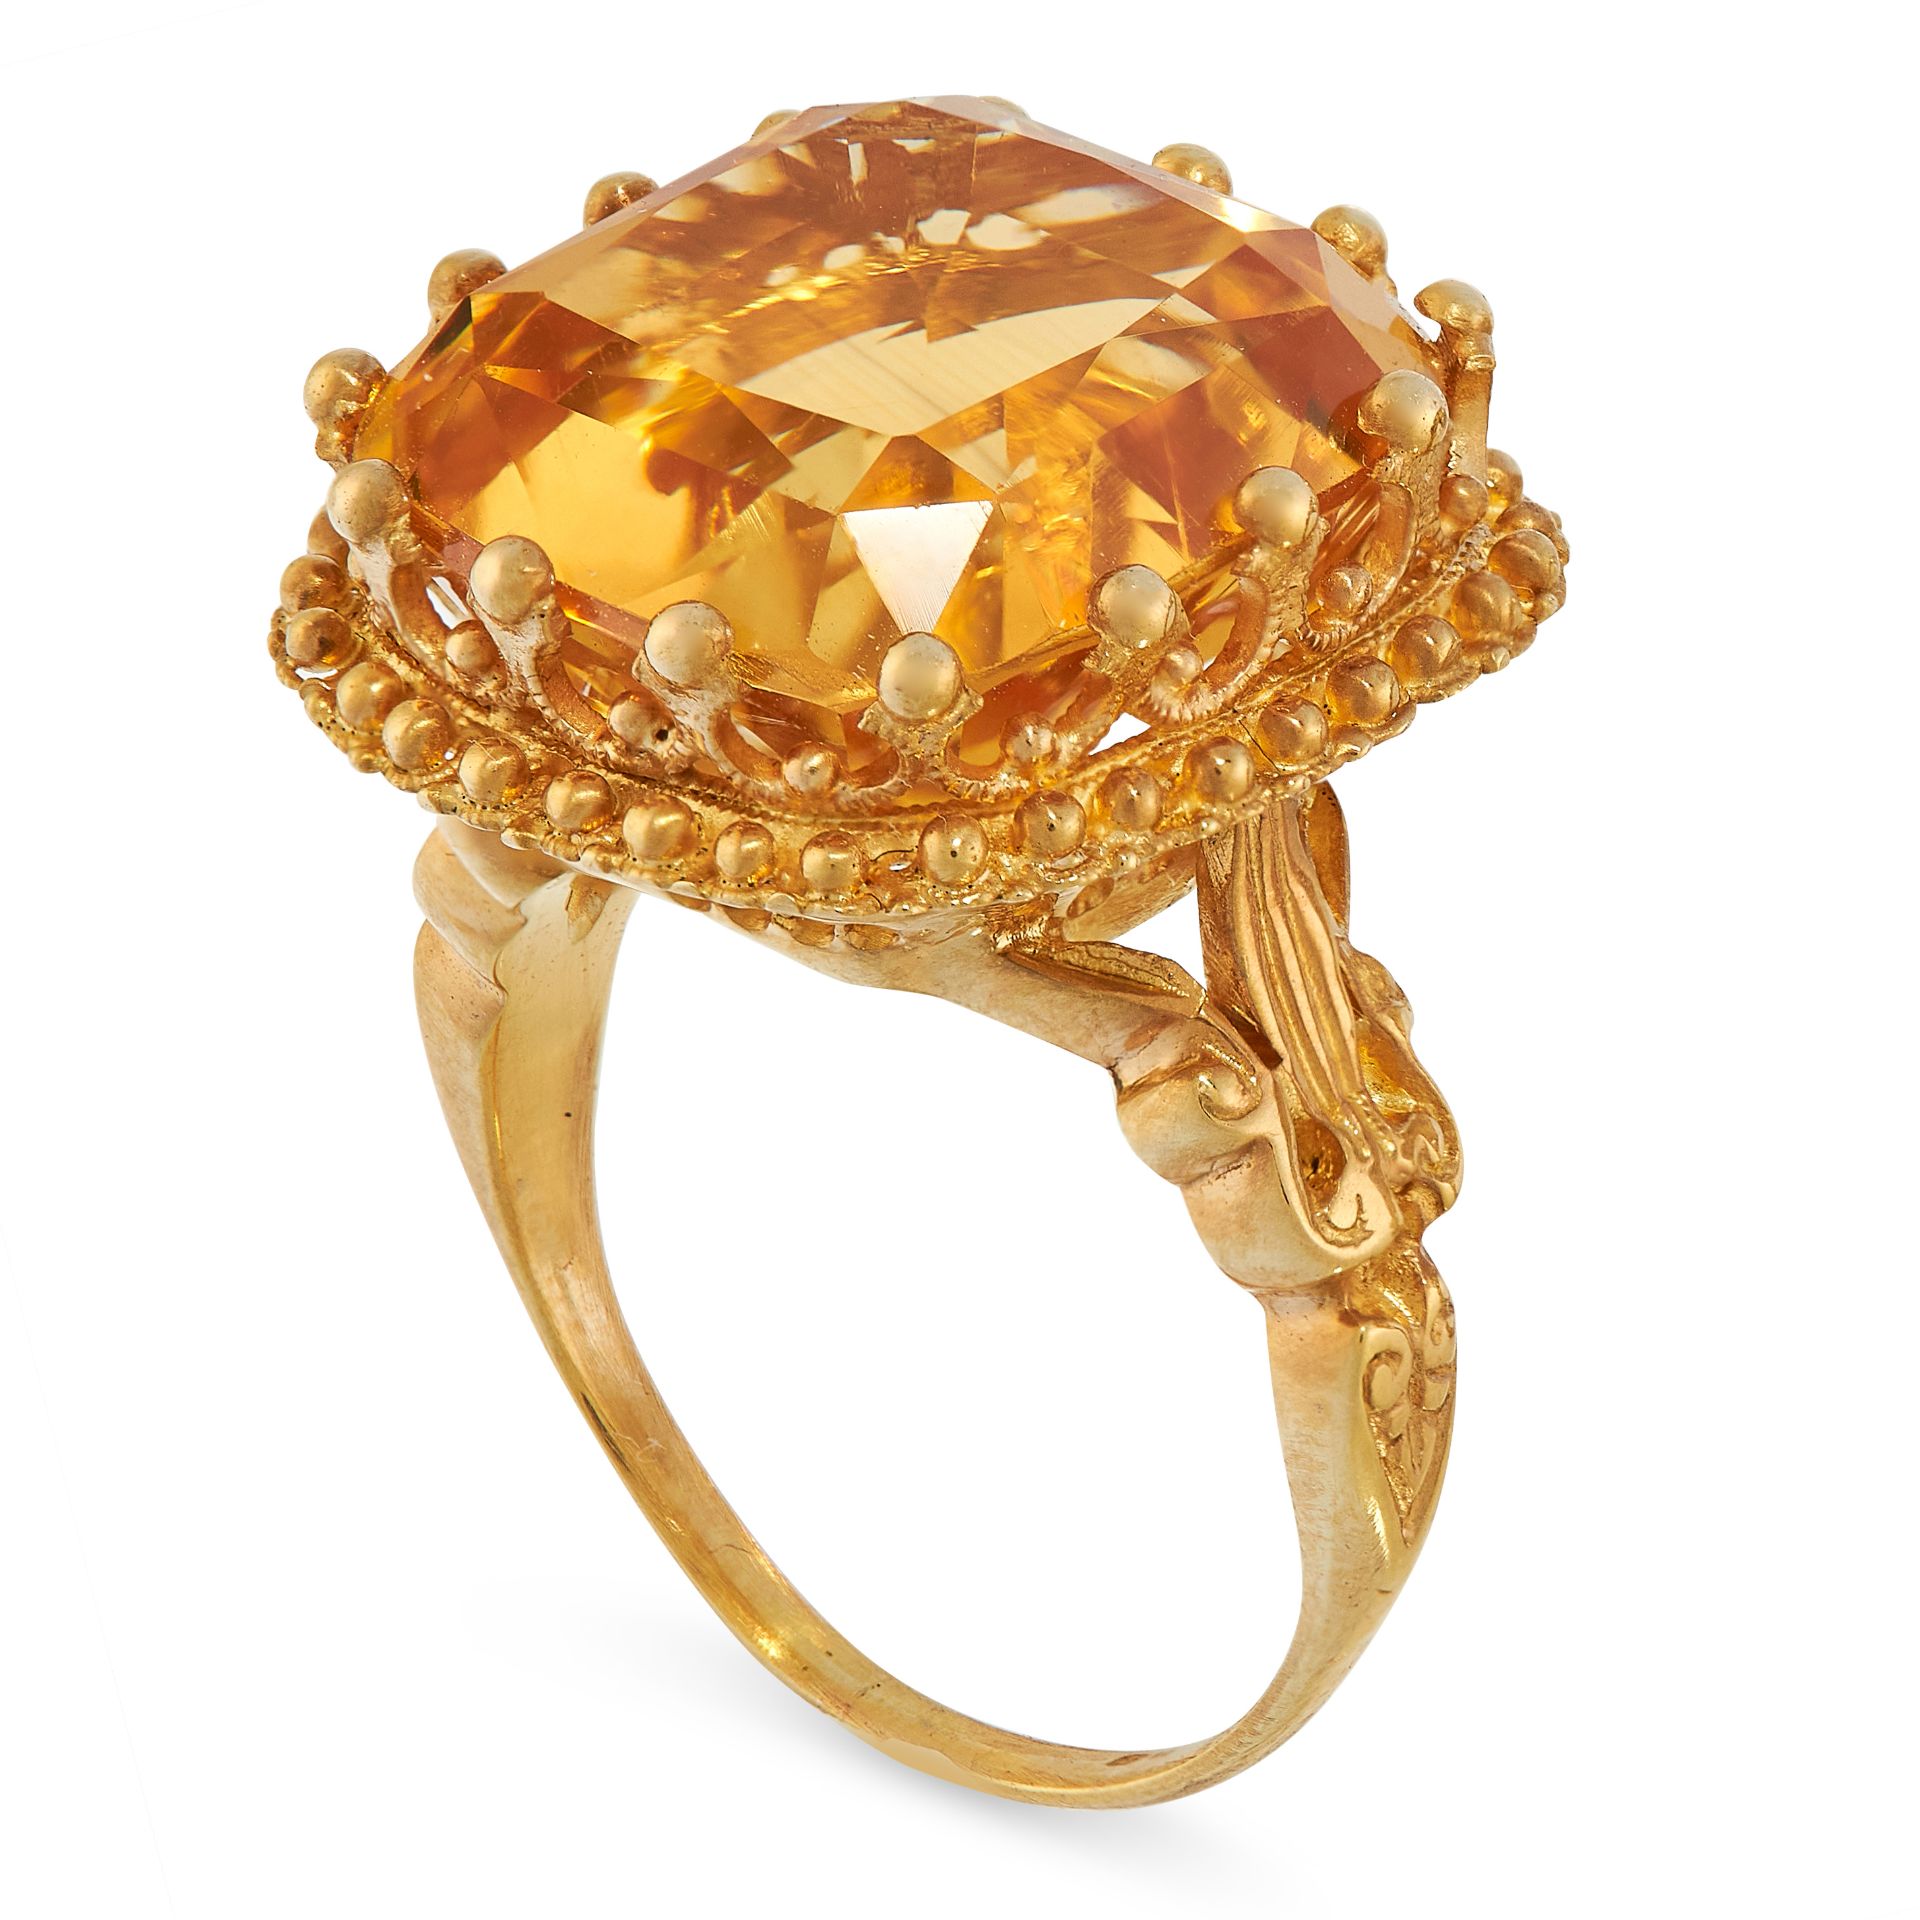 CITRINE DRESS RING comprising of a cushion cut citrine of 8.44 carats in beaded border, with - Image 2 of 2